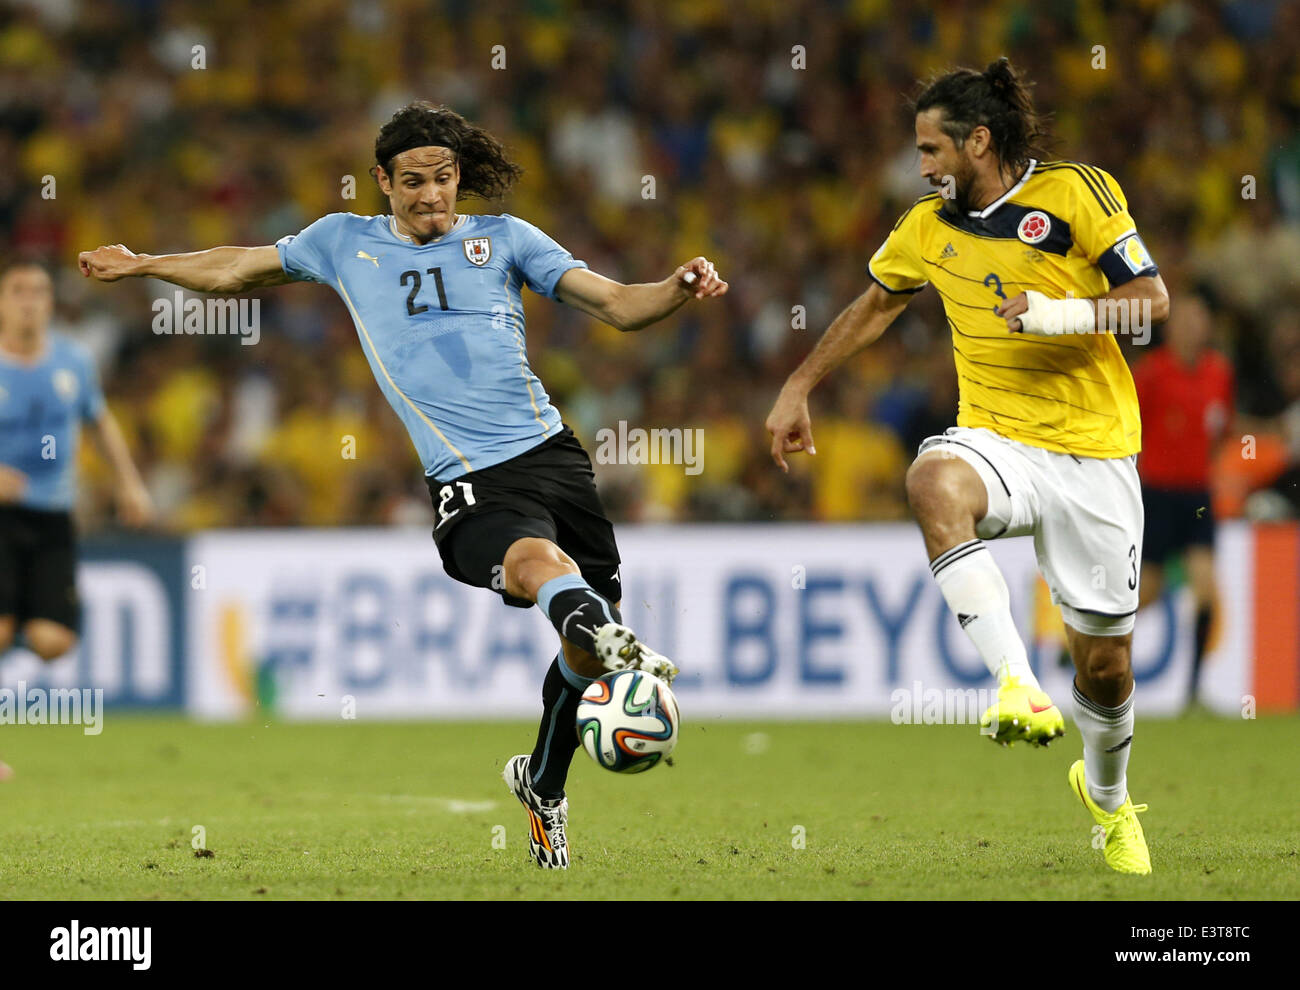 Rio De Janeiro, Brazil. 28th June, 2014. Uruguay's Edinson Cavani (L) vies with Colombia's Mario Yepes during a Round of 16 match between Colombia and Uruguay of 2014 FIFA World Cup at the Estadio do Maracana Stadium in Rio de Janeiro, Brazil, on June 28, 2014. Credit:  Wang Lili/Xinhua/Alamy Live News Stock Photo